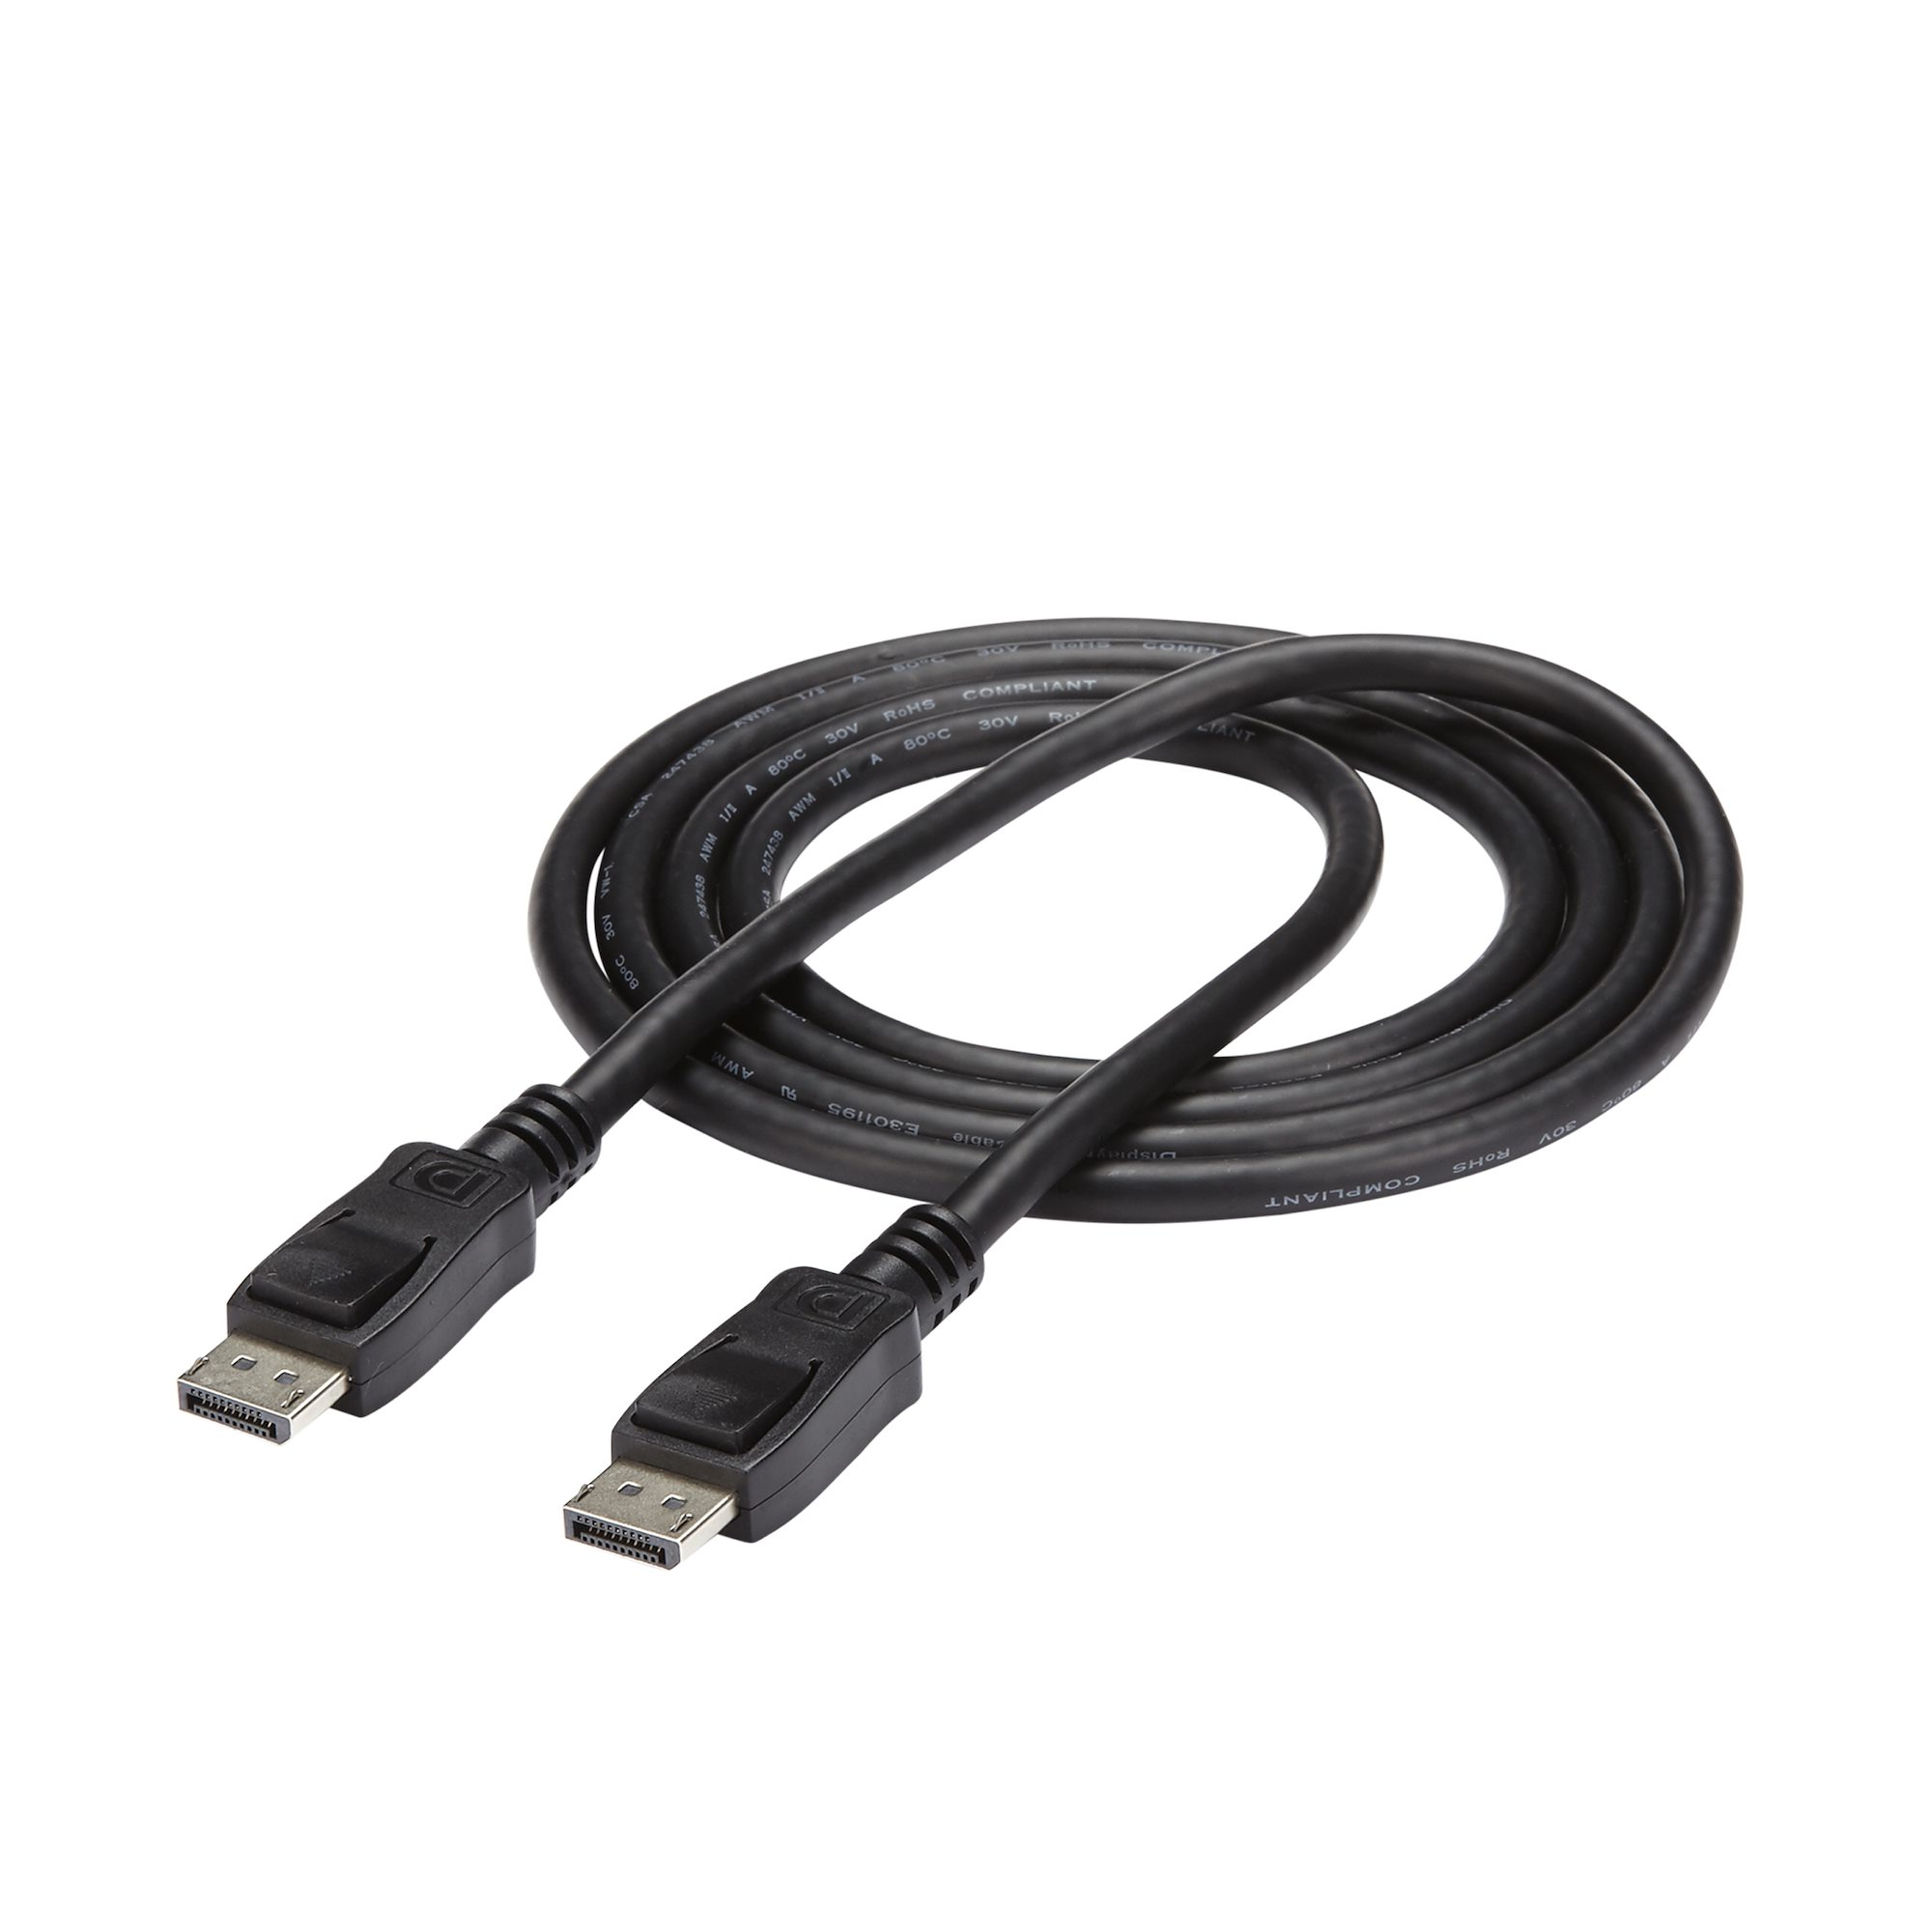 DP to DP Cable 4K Resolution Ready Cable Matters DisplayPort to DisplayPort Cable 6 Feet 